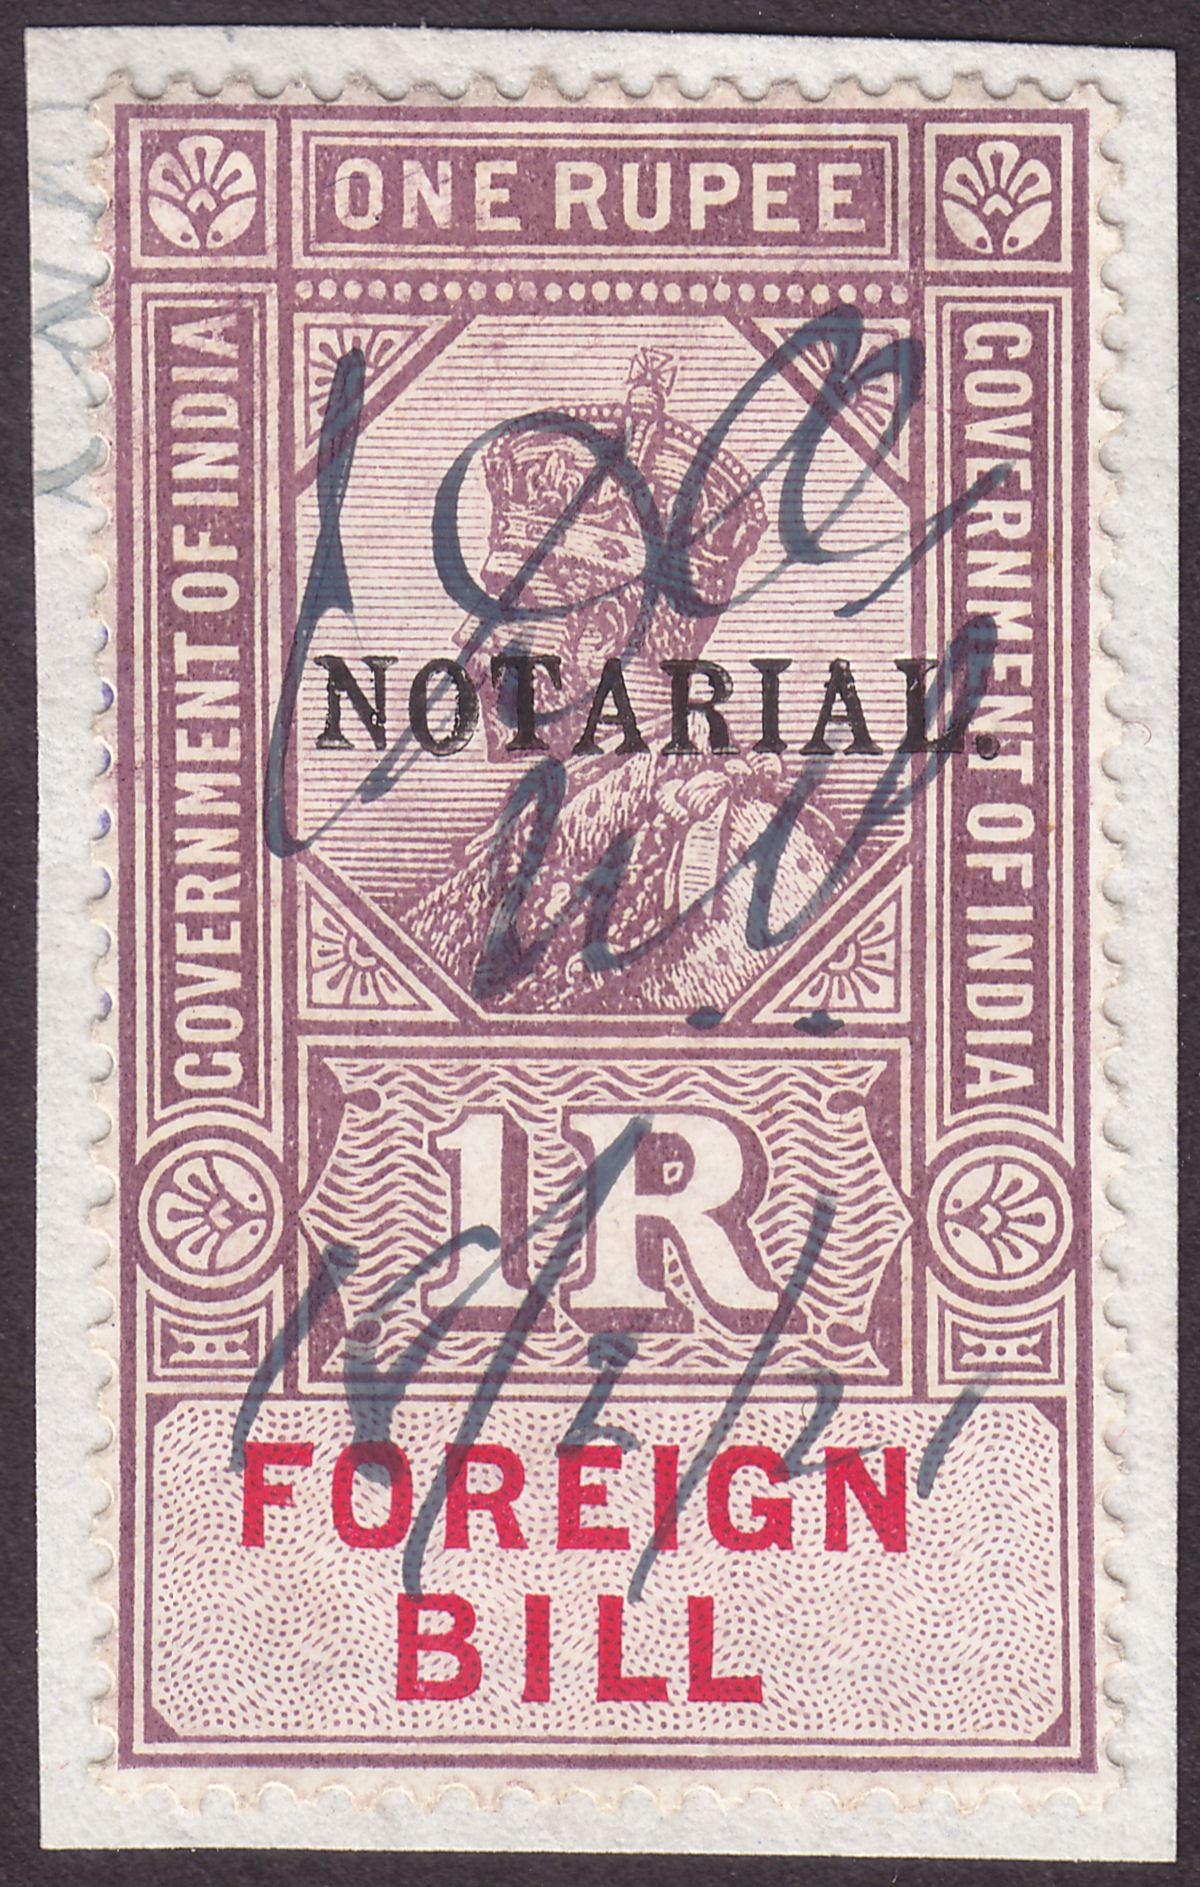 India 1923 KGV Revenue Notarial Overprint on Foreign Bill 1r Used on Piece BF30